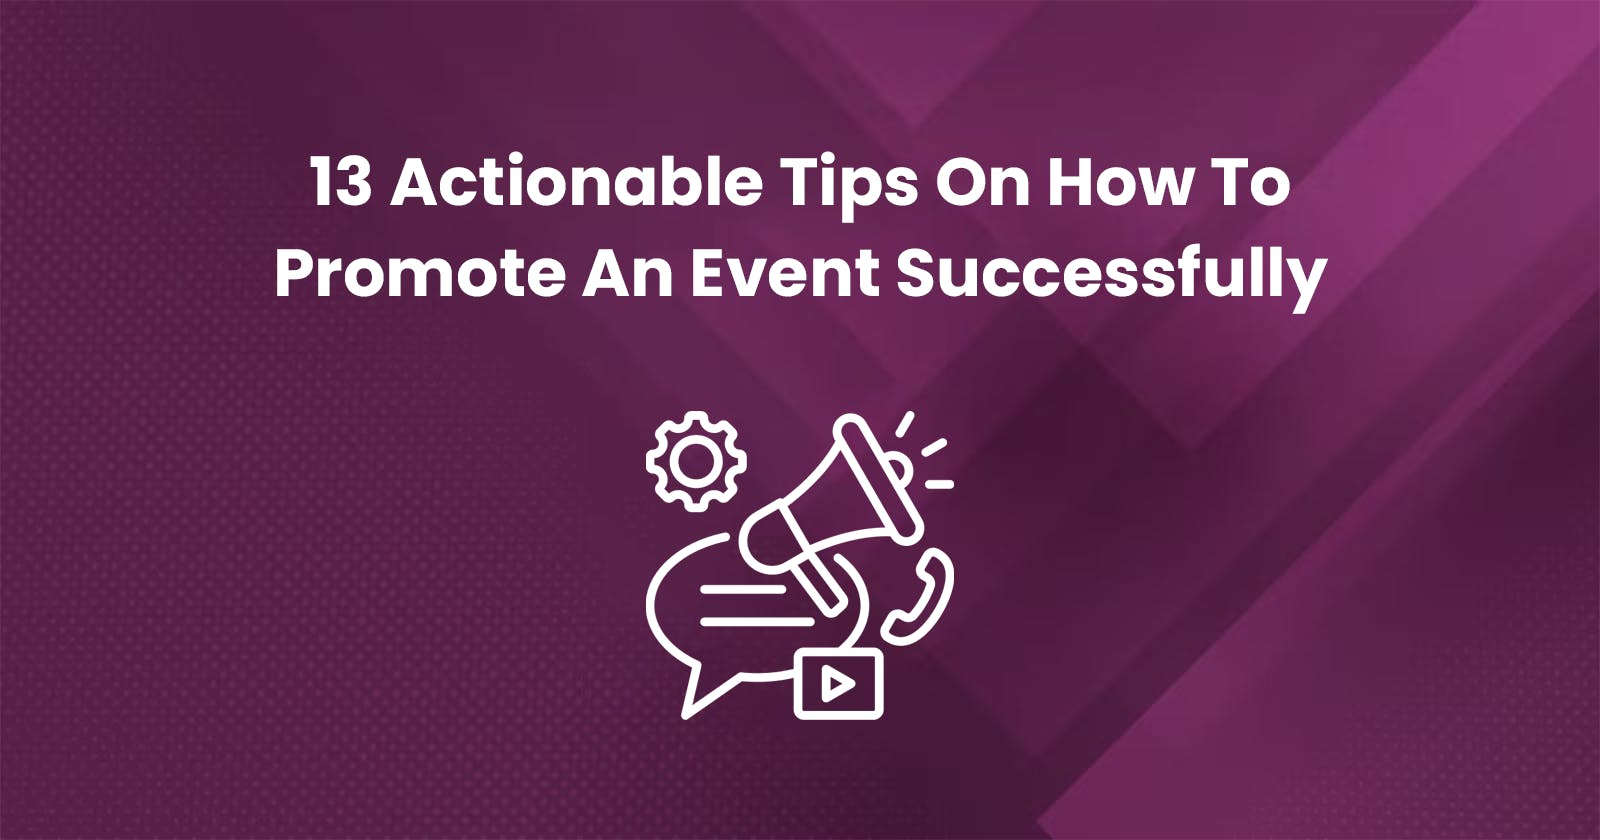 13 Actionable Tips On How To Promote An Event Successfully